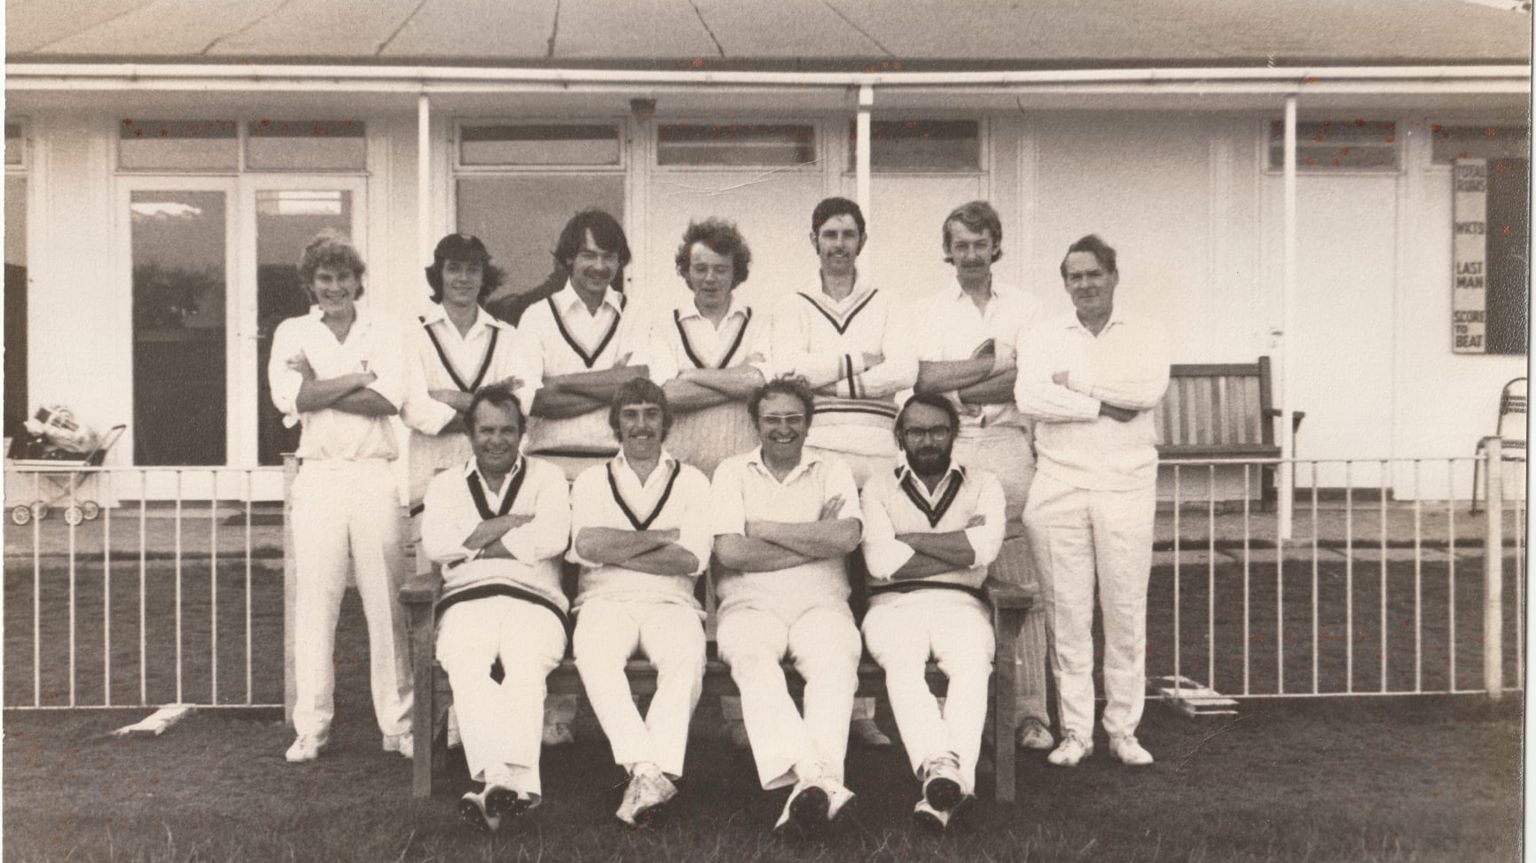  A black and white photo of Droitwich Spa Cricket Club mens team